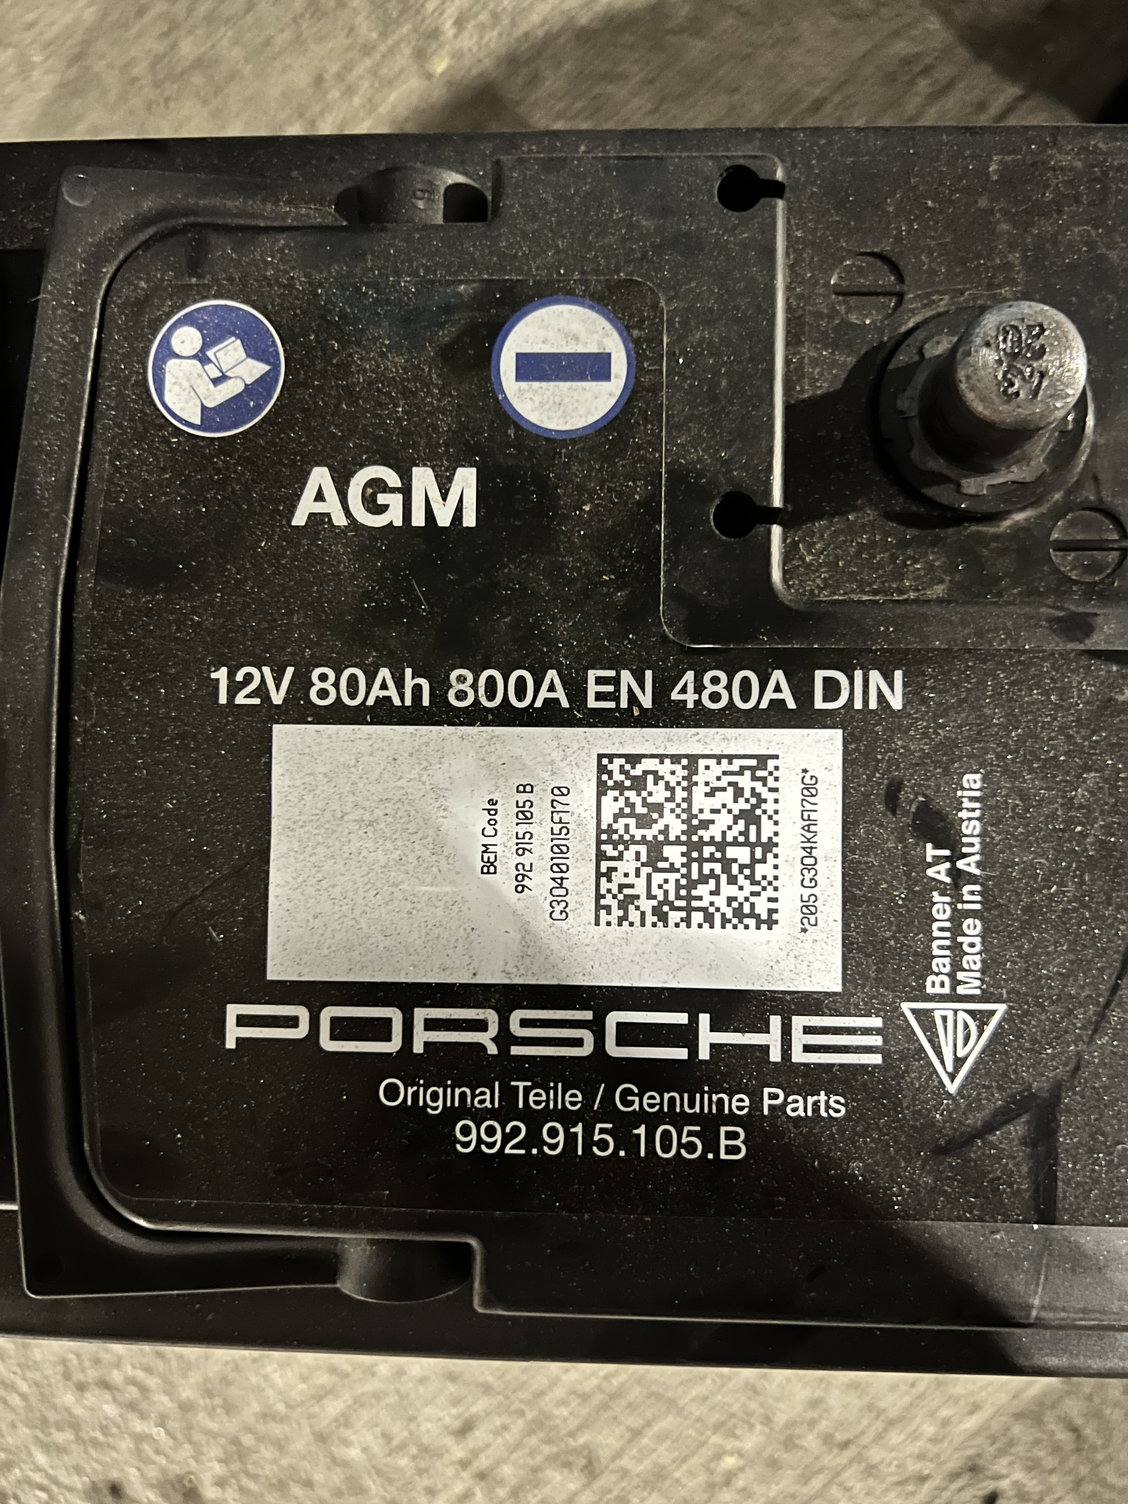 Group 49 battery fits fine. -  Forums